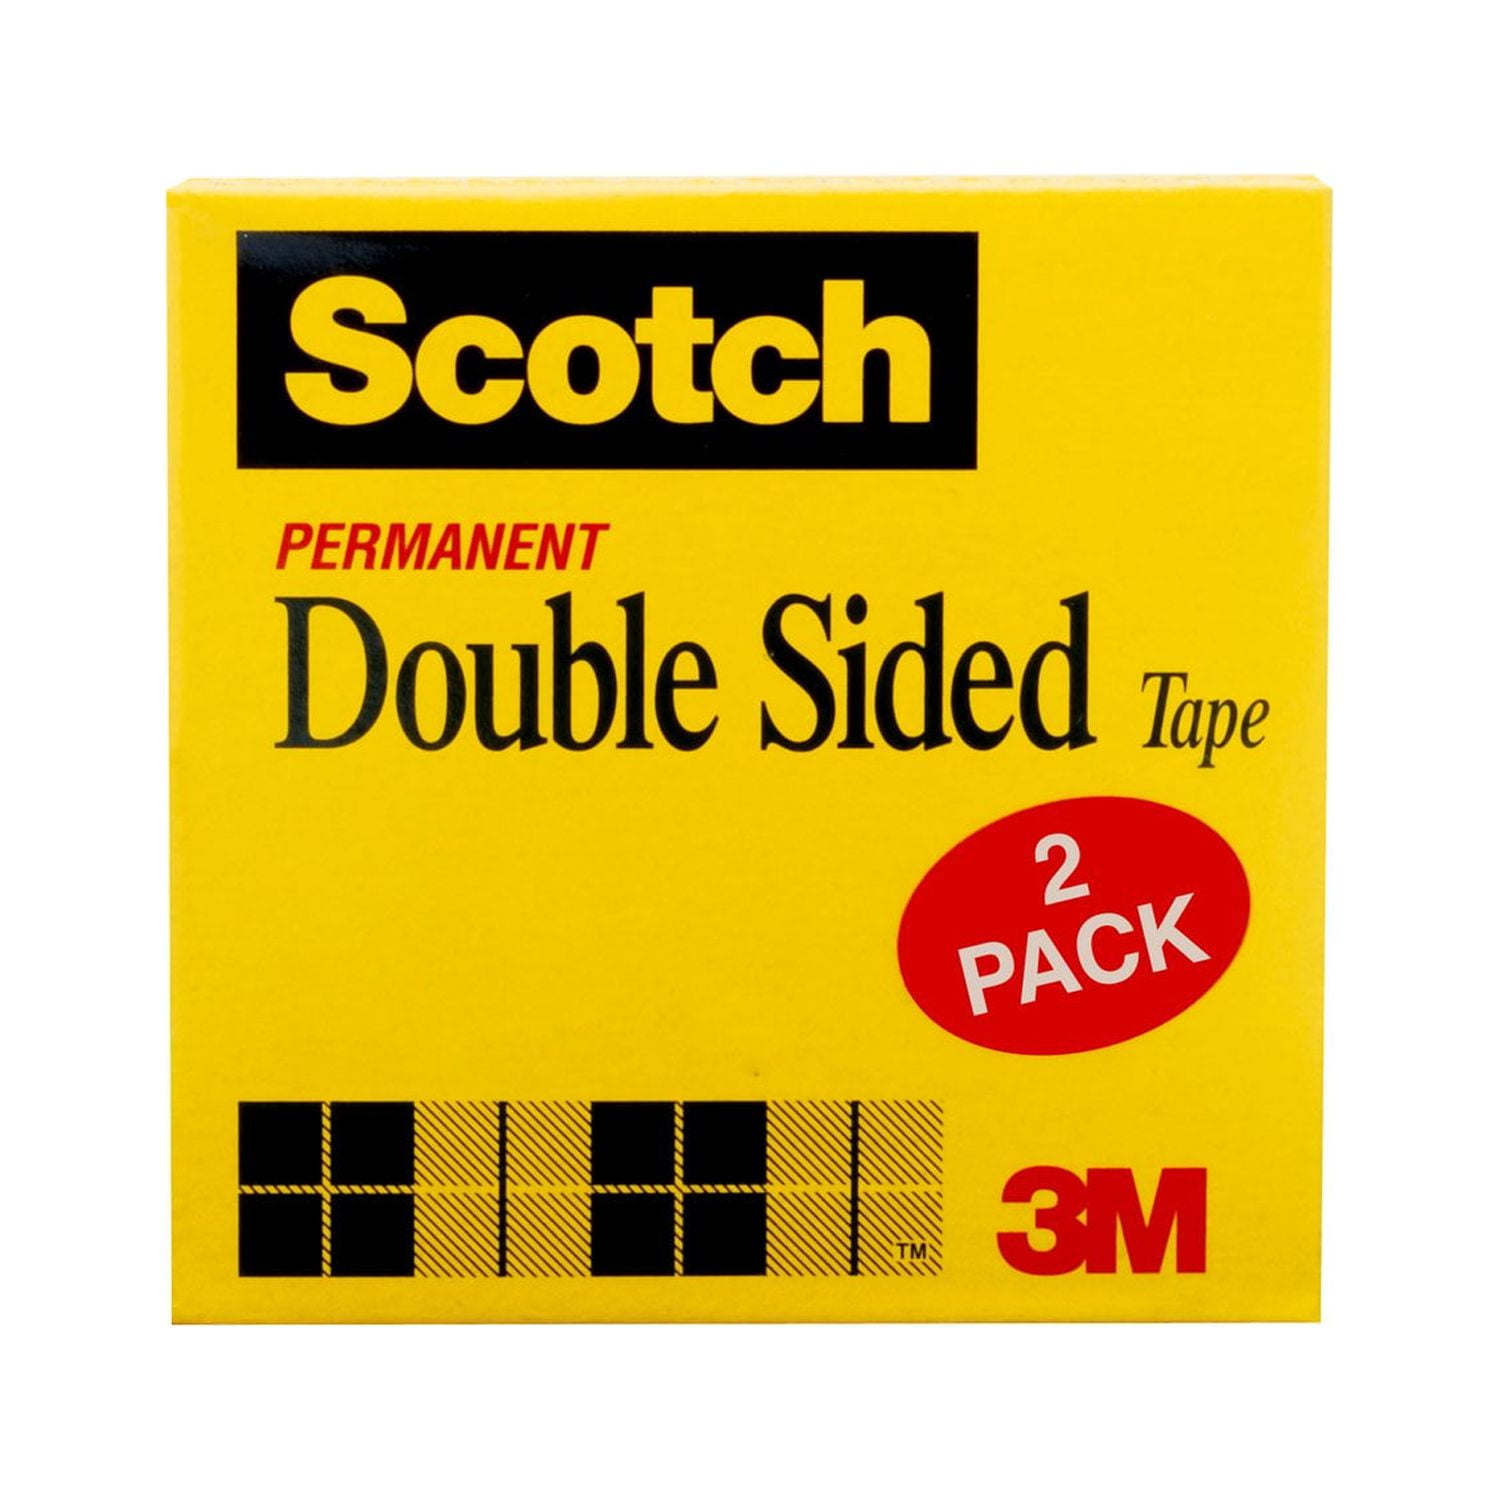 Scotch Double Sided Tape, 1/2 in. x 500 in., Permanent, 2 Boxes/Pack 